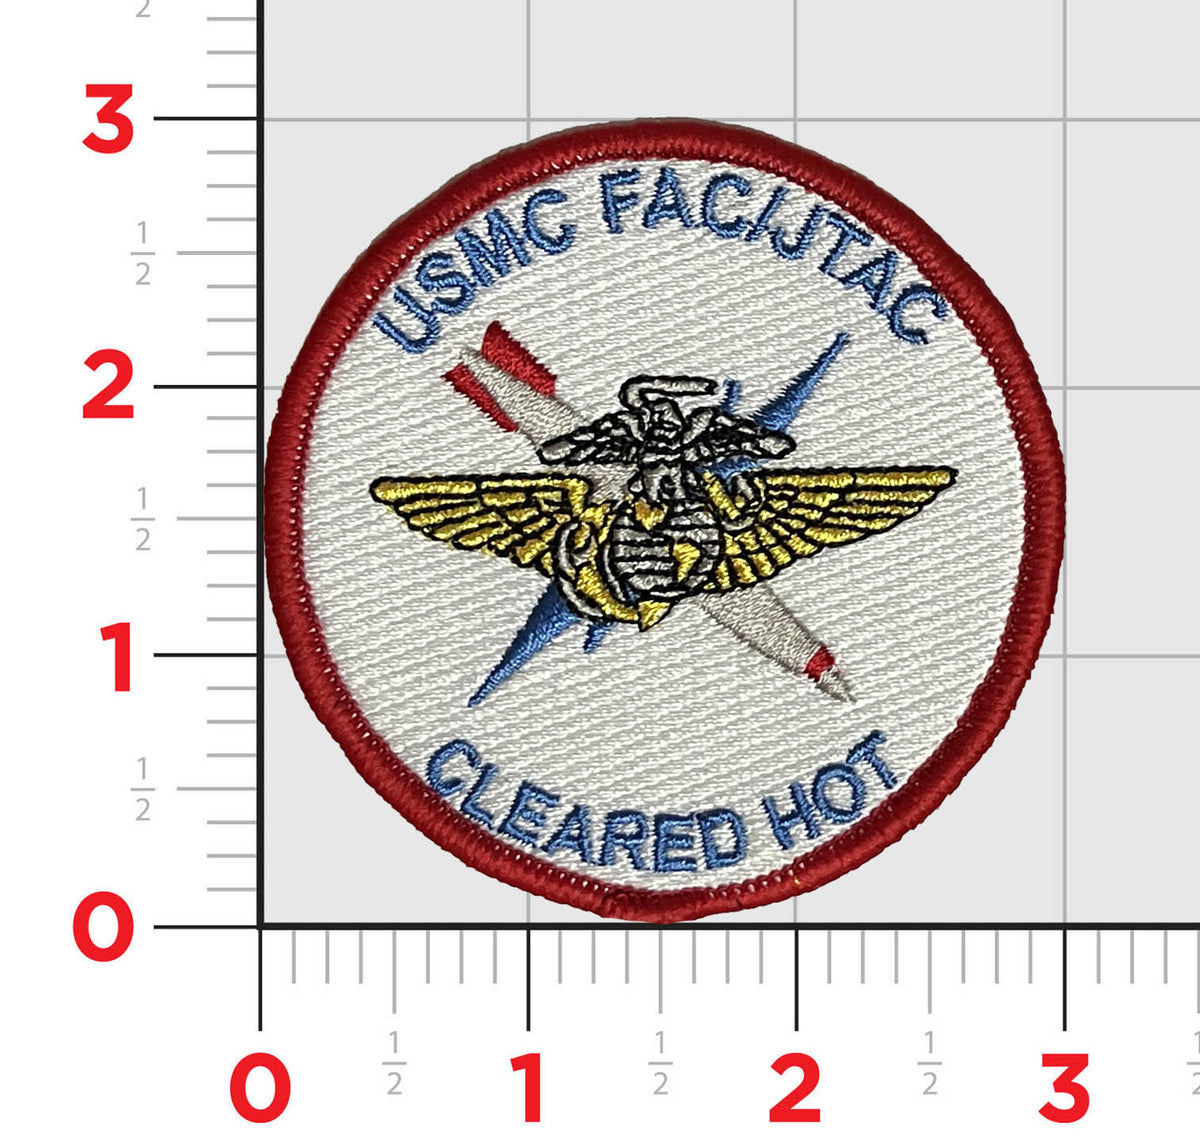 HMM/VMM-362 Olaf PVC Patch – Hook and Loop - Squadron Nostalgia